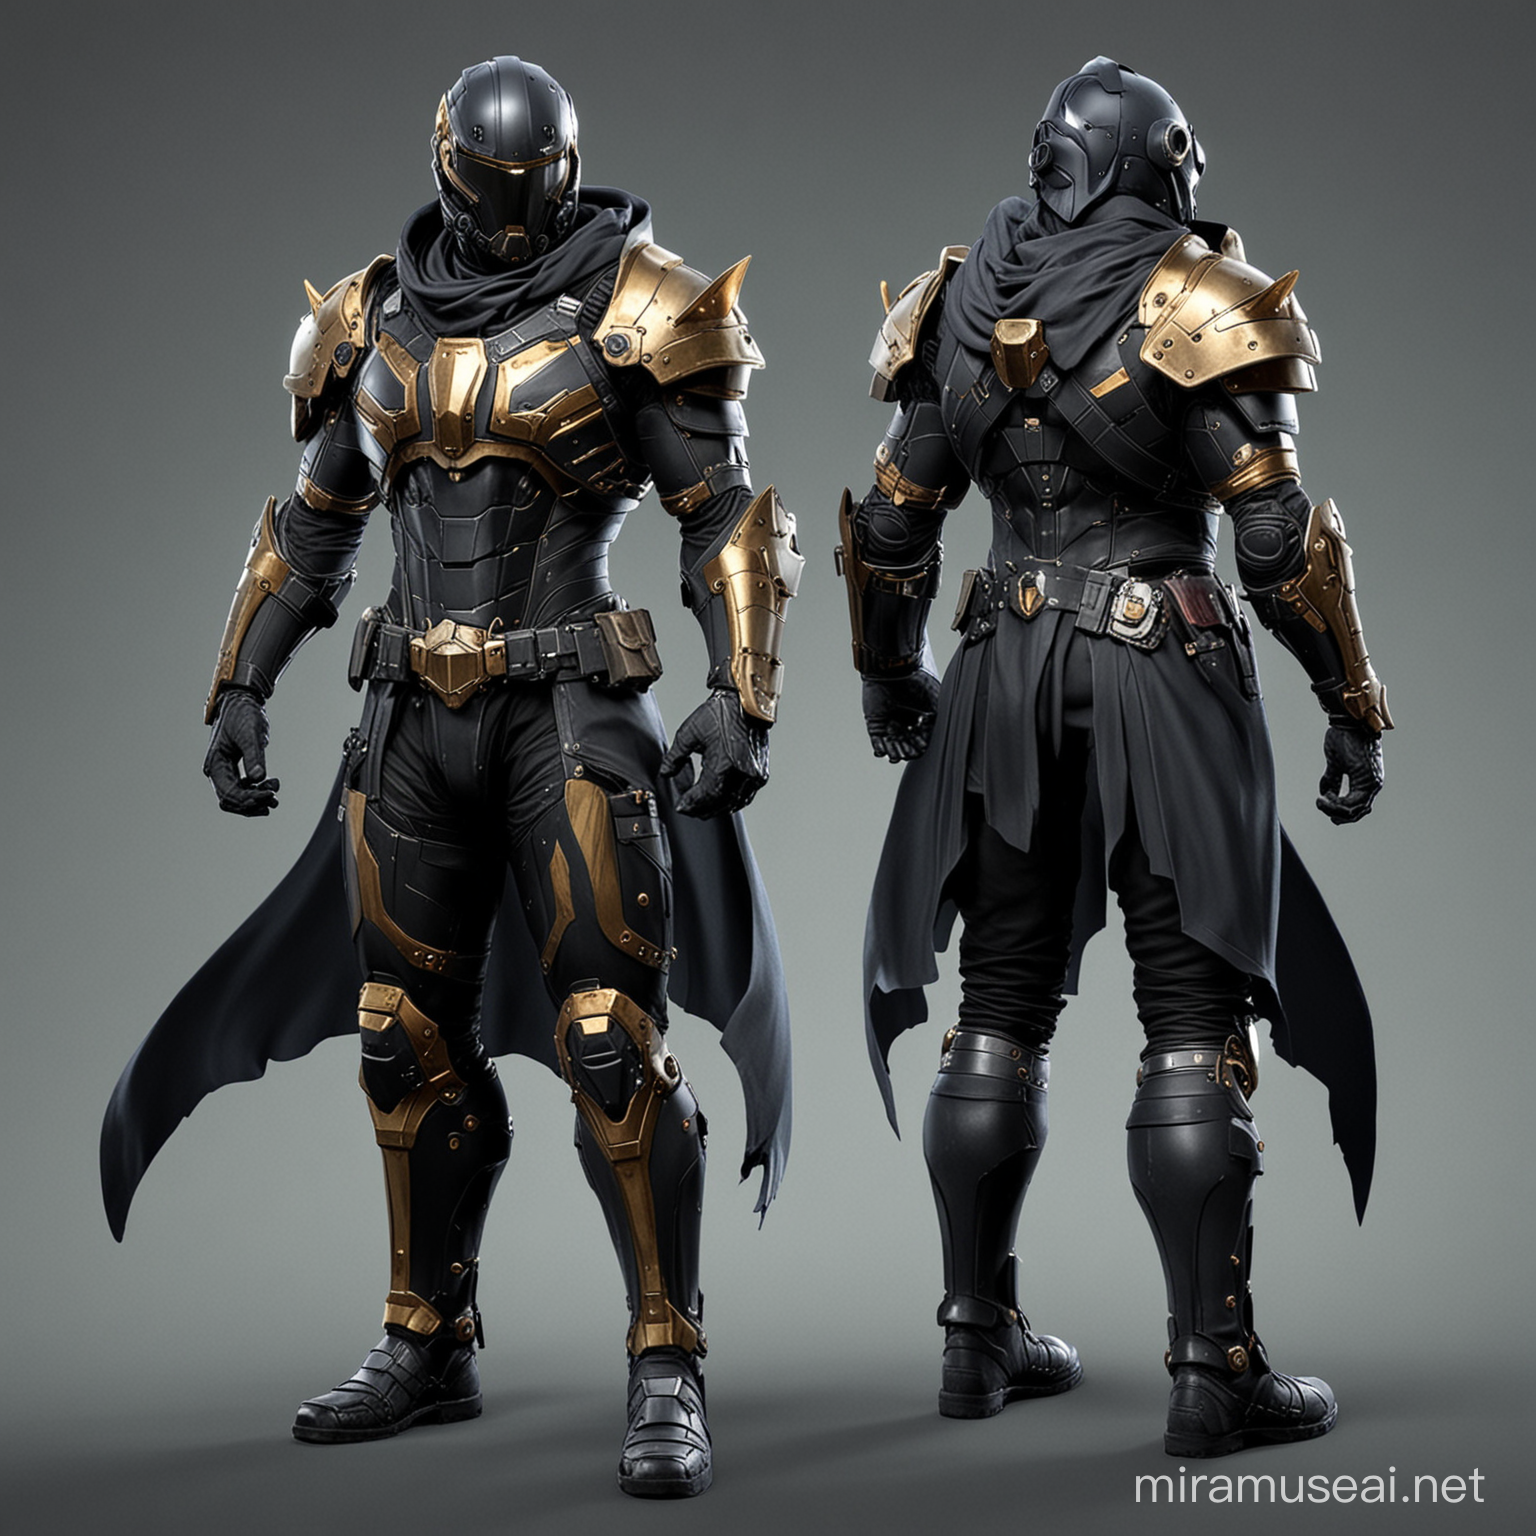 I want a futuristic male armor from the game universe helldivers 2. The armor needs to be heavy,  and appear war torn, primarily black with navy accents and includes a long cape.  The helmet includes horns and should resemble a theme from a horseman of the apocalypse. The pose of the armor needs to be front and back. The armor needs to feel ominous and intimidating. 